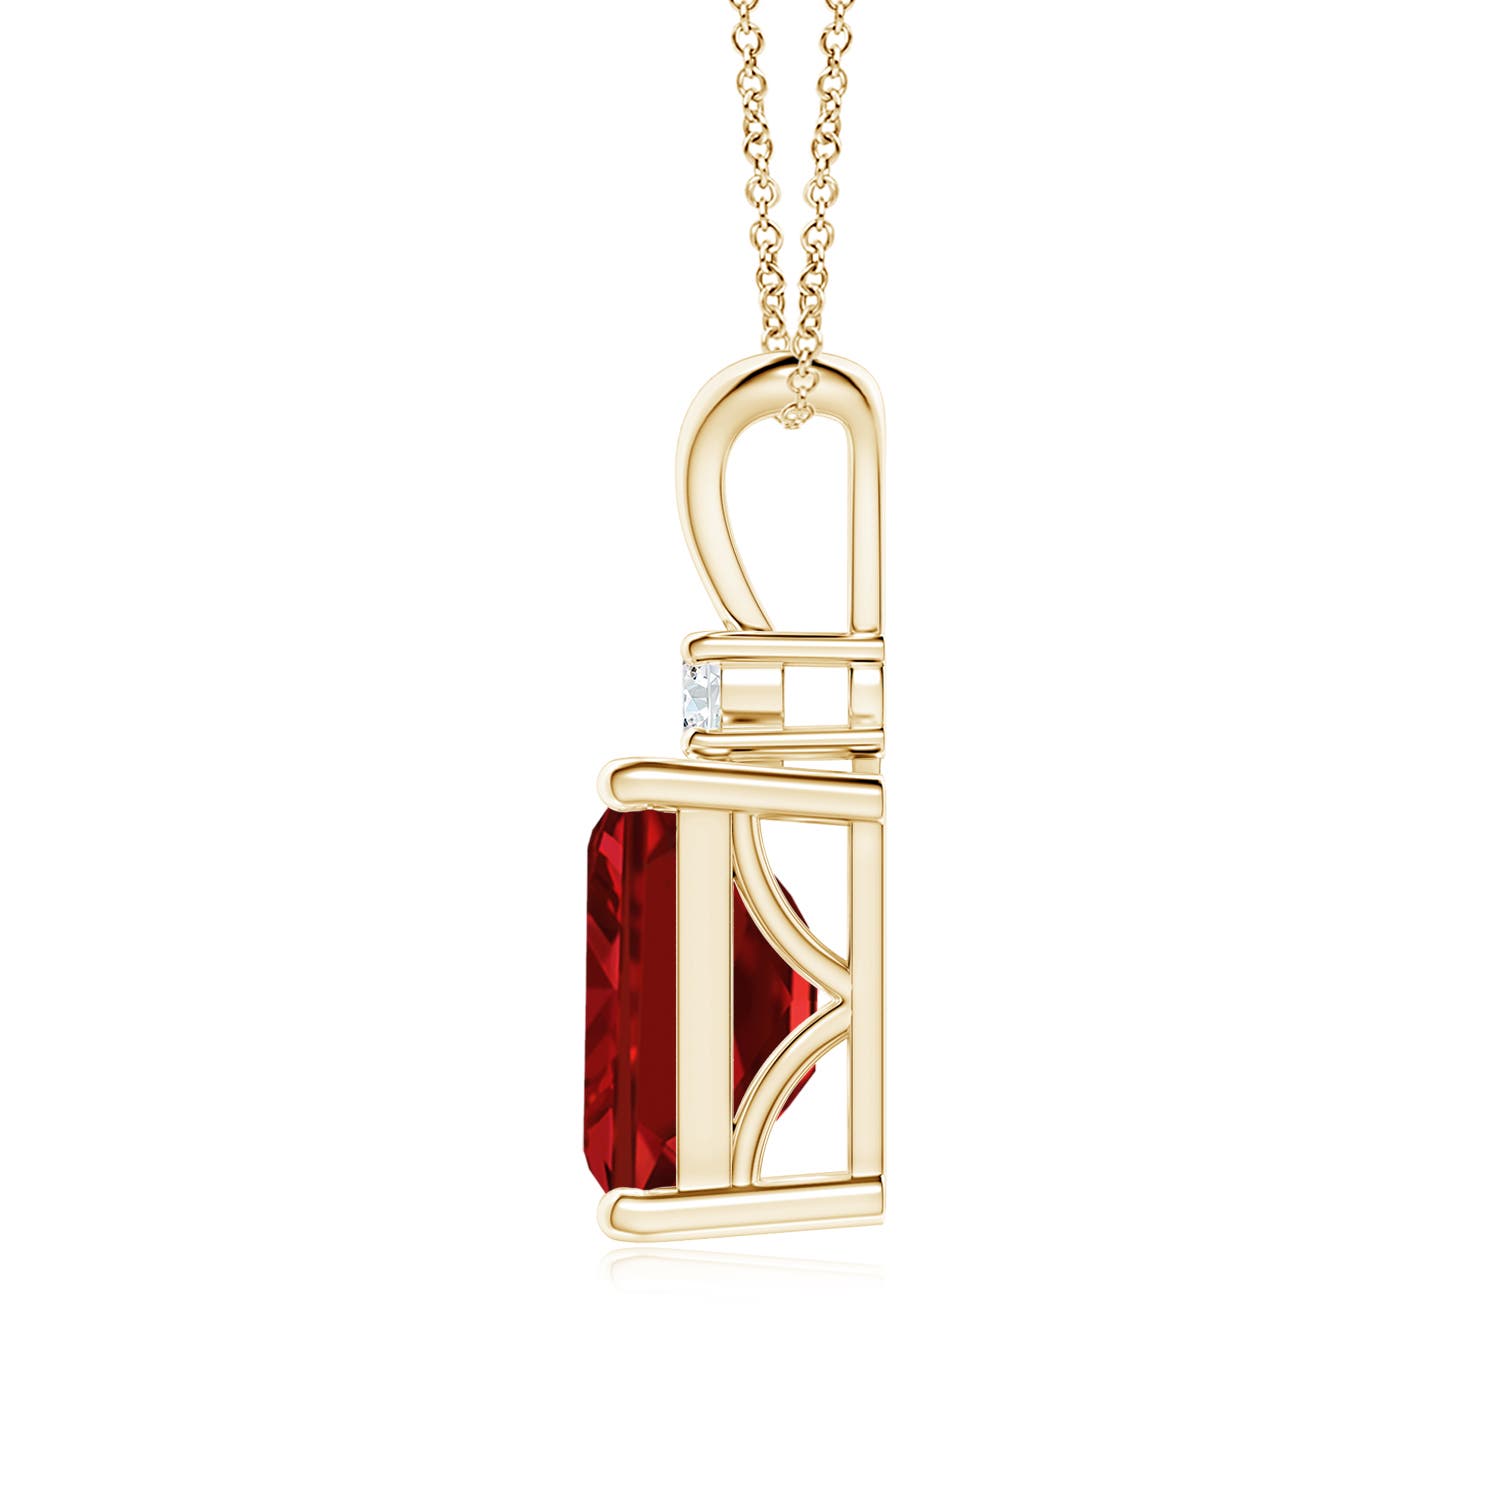 AAAA - Ruby / 3.07 CT / 14 KT Yellow Gold